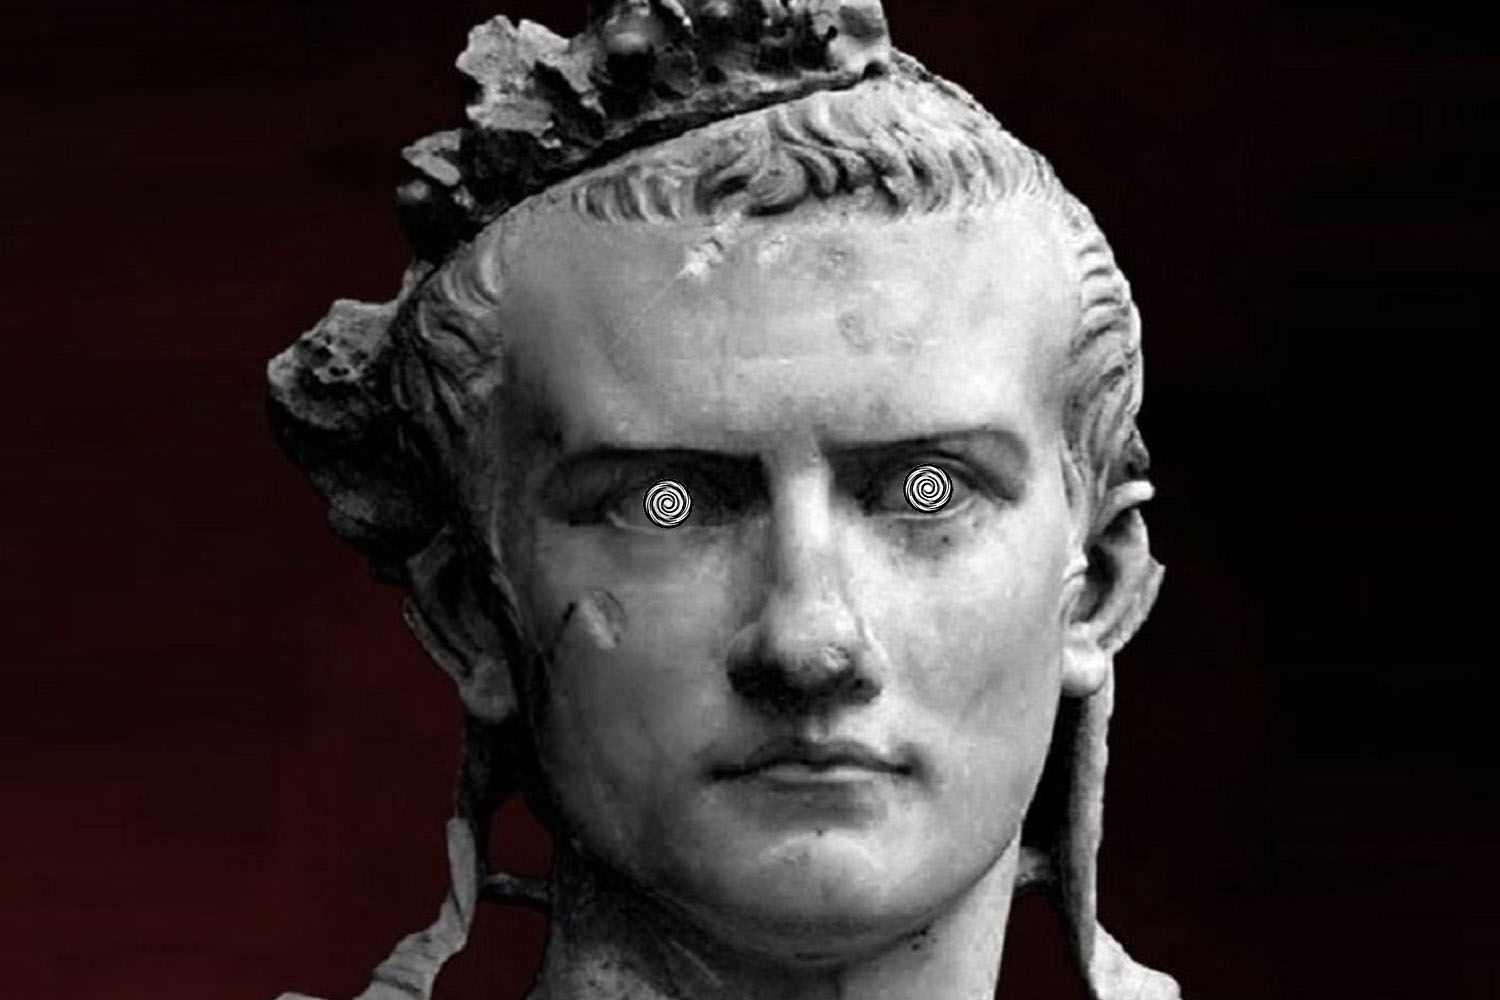 Power tends to corrupt, and absolute power corrupts absolutely, and if you add a touch of sexual perversion, and a twist of insanity you begin to paint a reasonable picture of Caligula who was the third Roman emperor, ruling from AD 37 to 41.